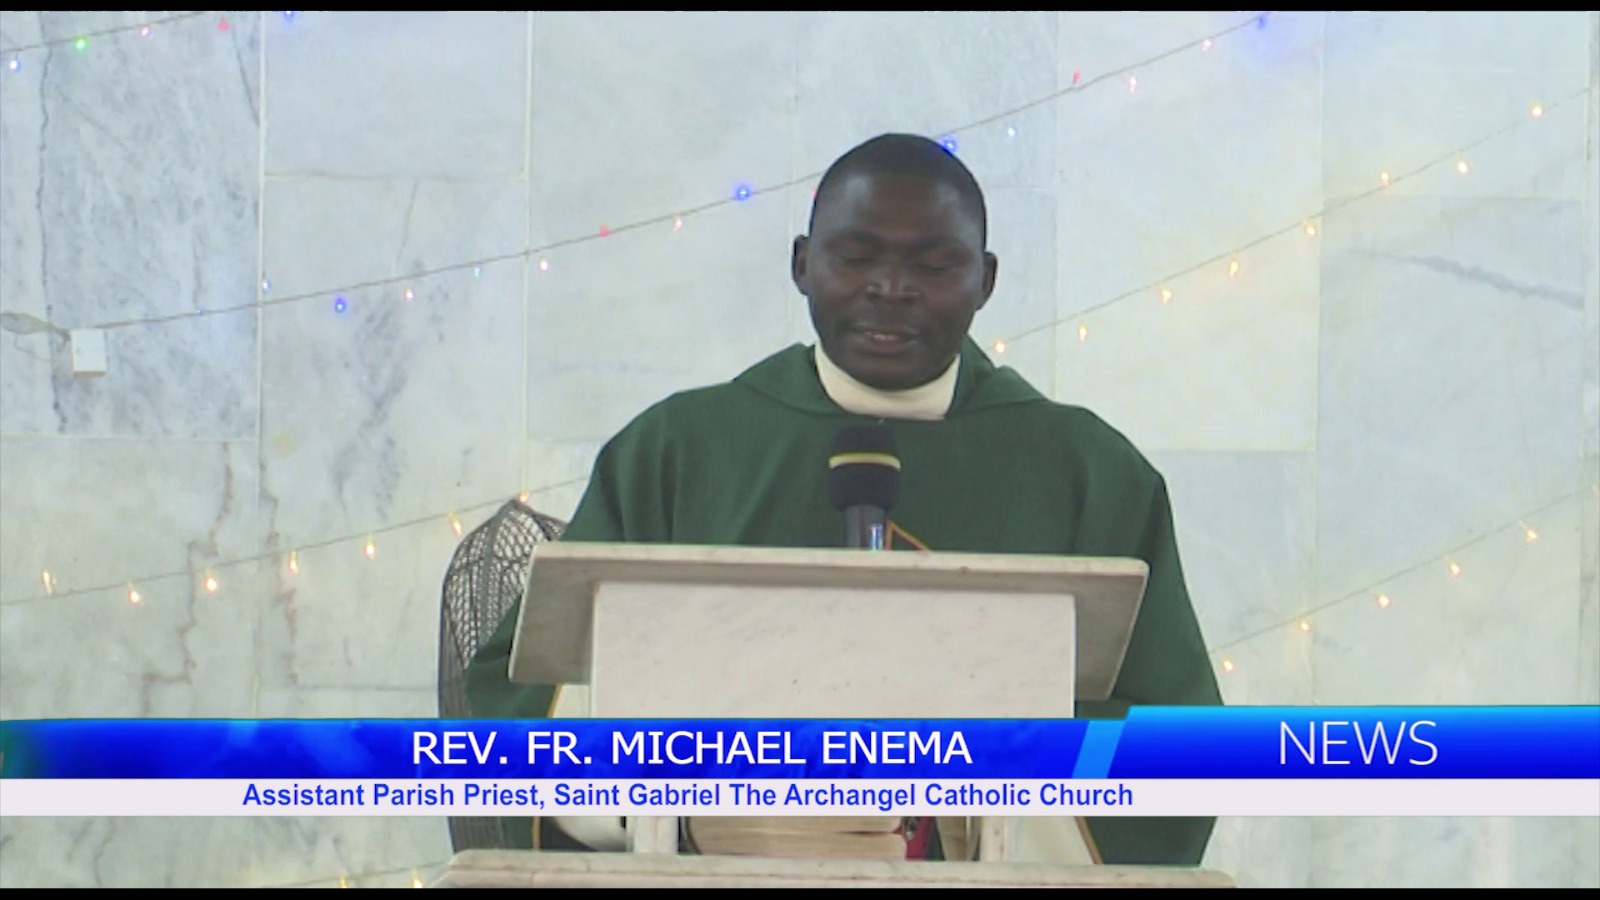 Rev. Fr. Michael Enema Urges Christians to Study the Bible Regularly